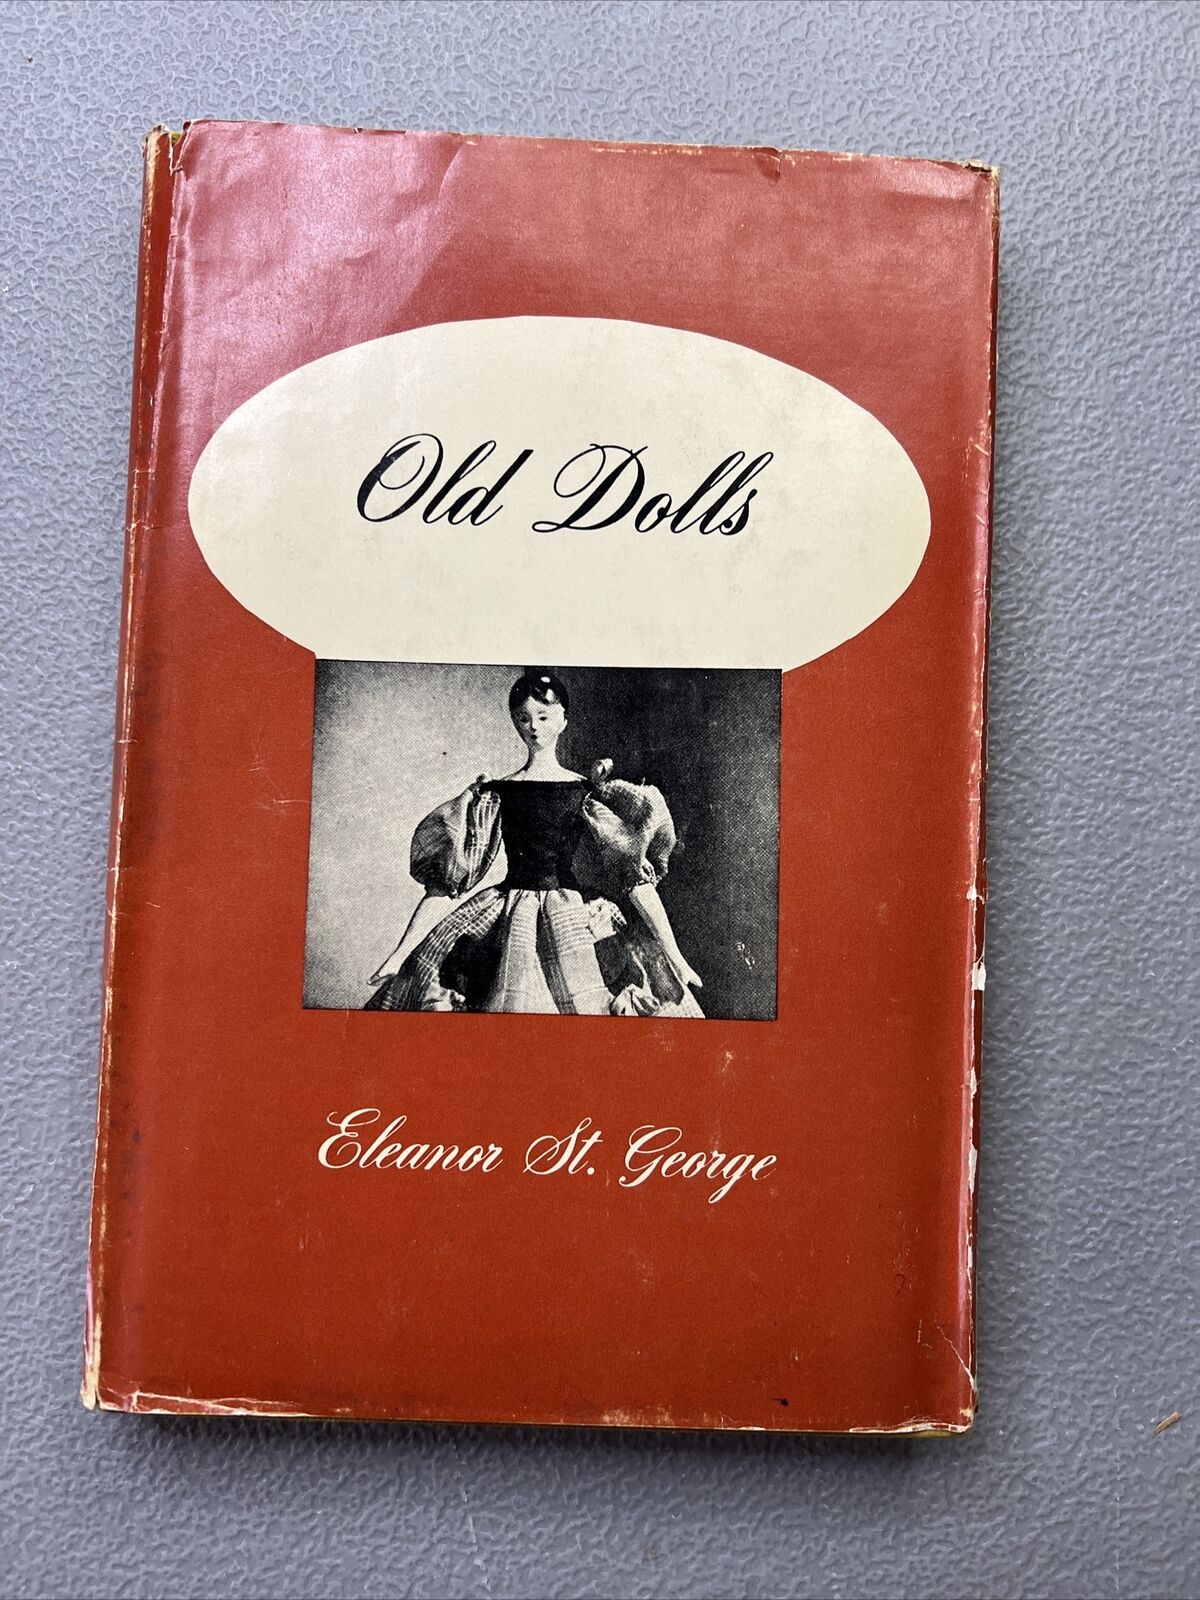 Old Dolls Eleanor St. George 1950 4th printing HB Collectible 77 photos Antique